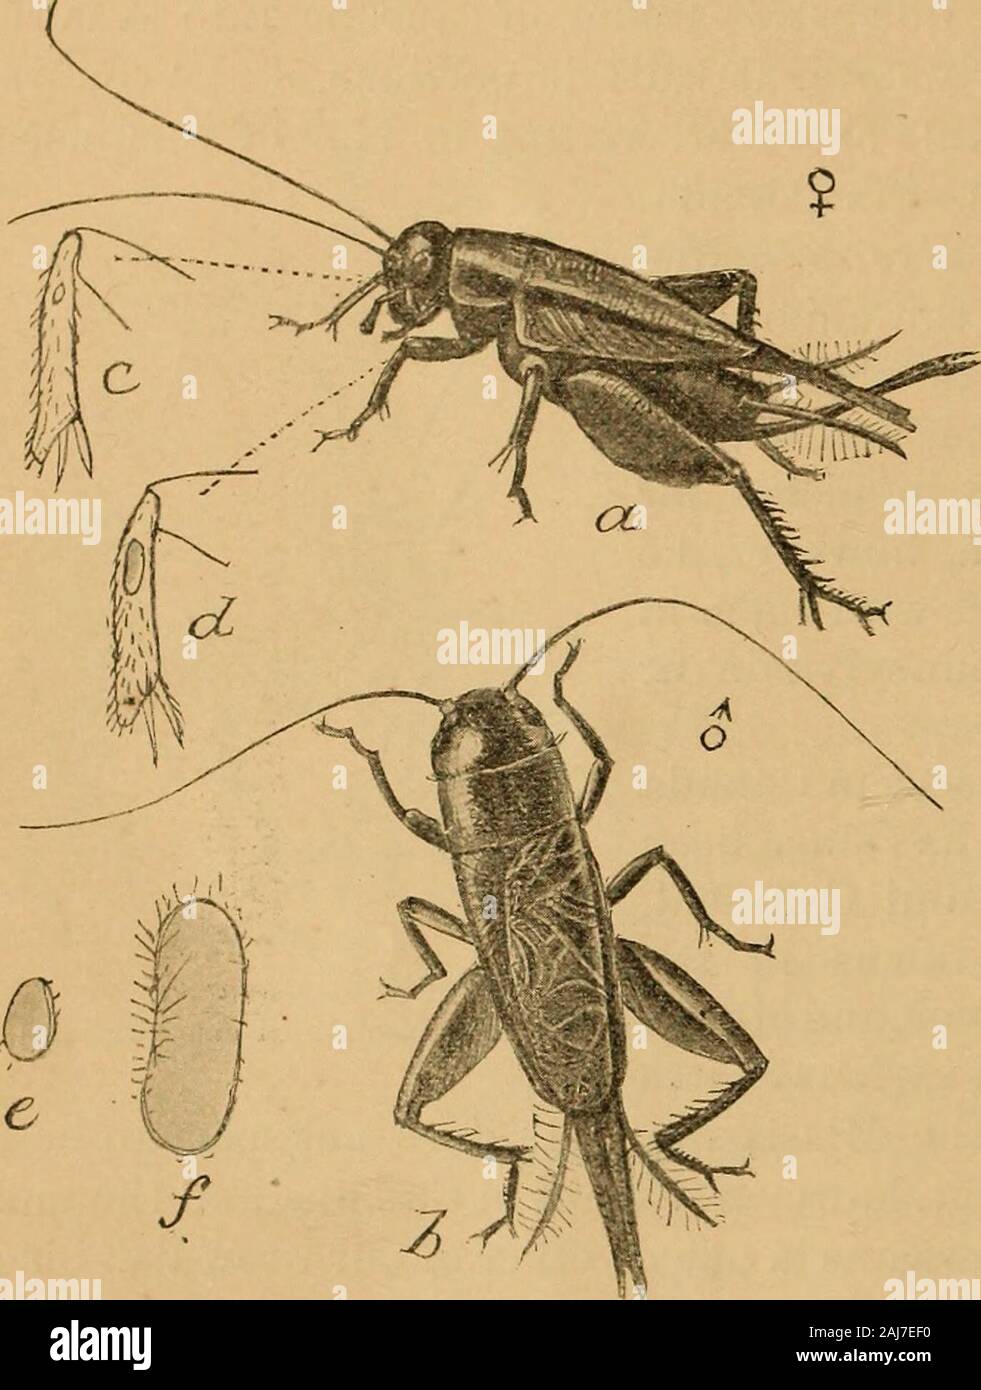 Principal household insects of the United States . in-sect, however, it must beheard, and what seems tobe the insect ear is foundin curious organs on thefore tibiae, represented inthe illustration (fig. 21,c,d,e,f). The house cricket usu-ally occurs on the groundfloor of dwellings, andevinces its liking for warmth by often occurring in the vicinity oflire]daces, concealing itself between the bricks of chimneys or behindbaseboards, frequently burrowing into the mortar of walls. It is par-ticularly apt to abound in bakehouses. It is rarely very abundant,but at times multiplies excessively and be Stock Photo